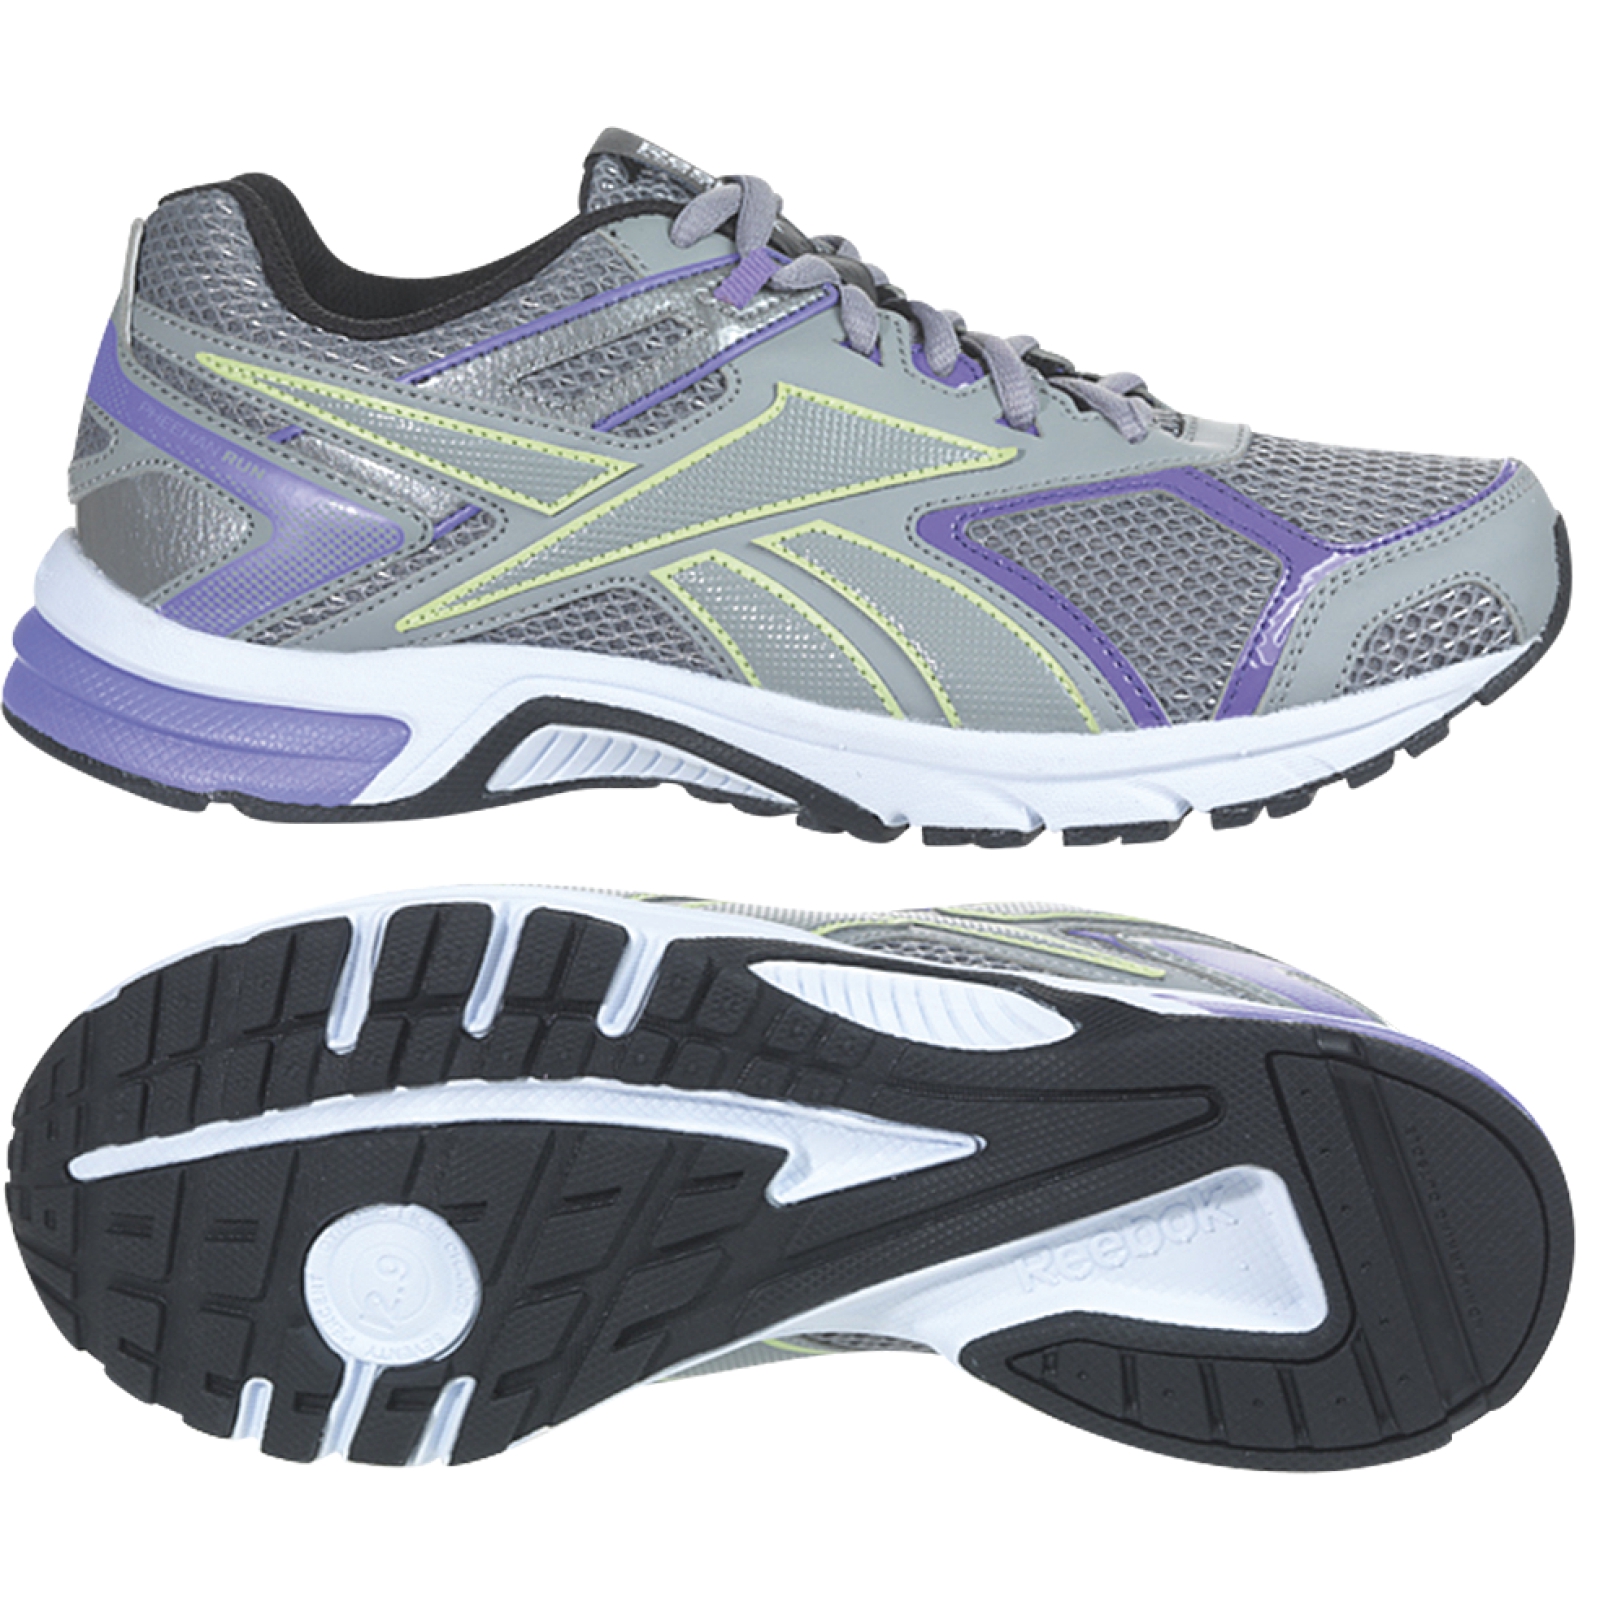 Reebok Women's Quick Chase Grey/Orchid/Citrus Running Shoe